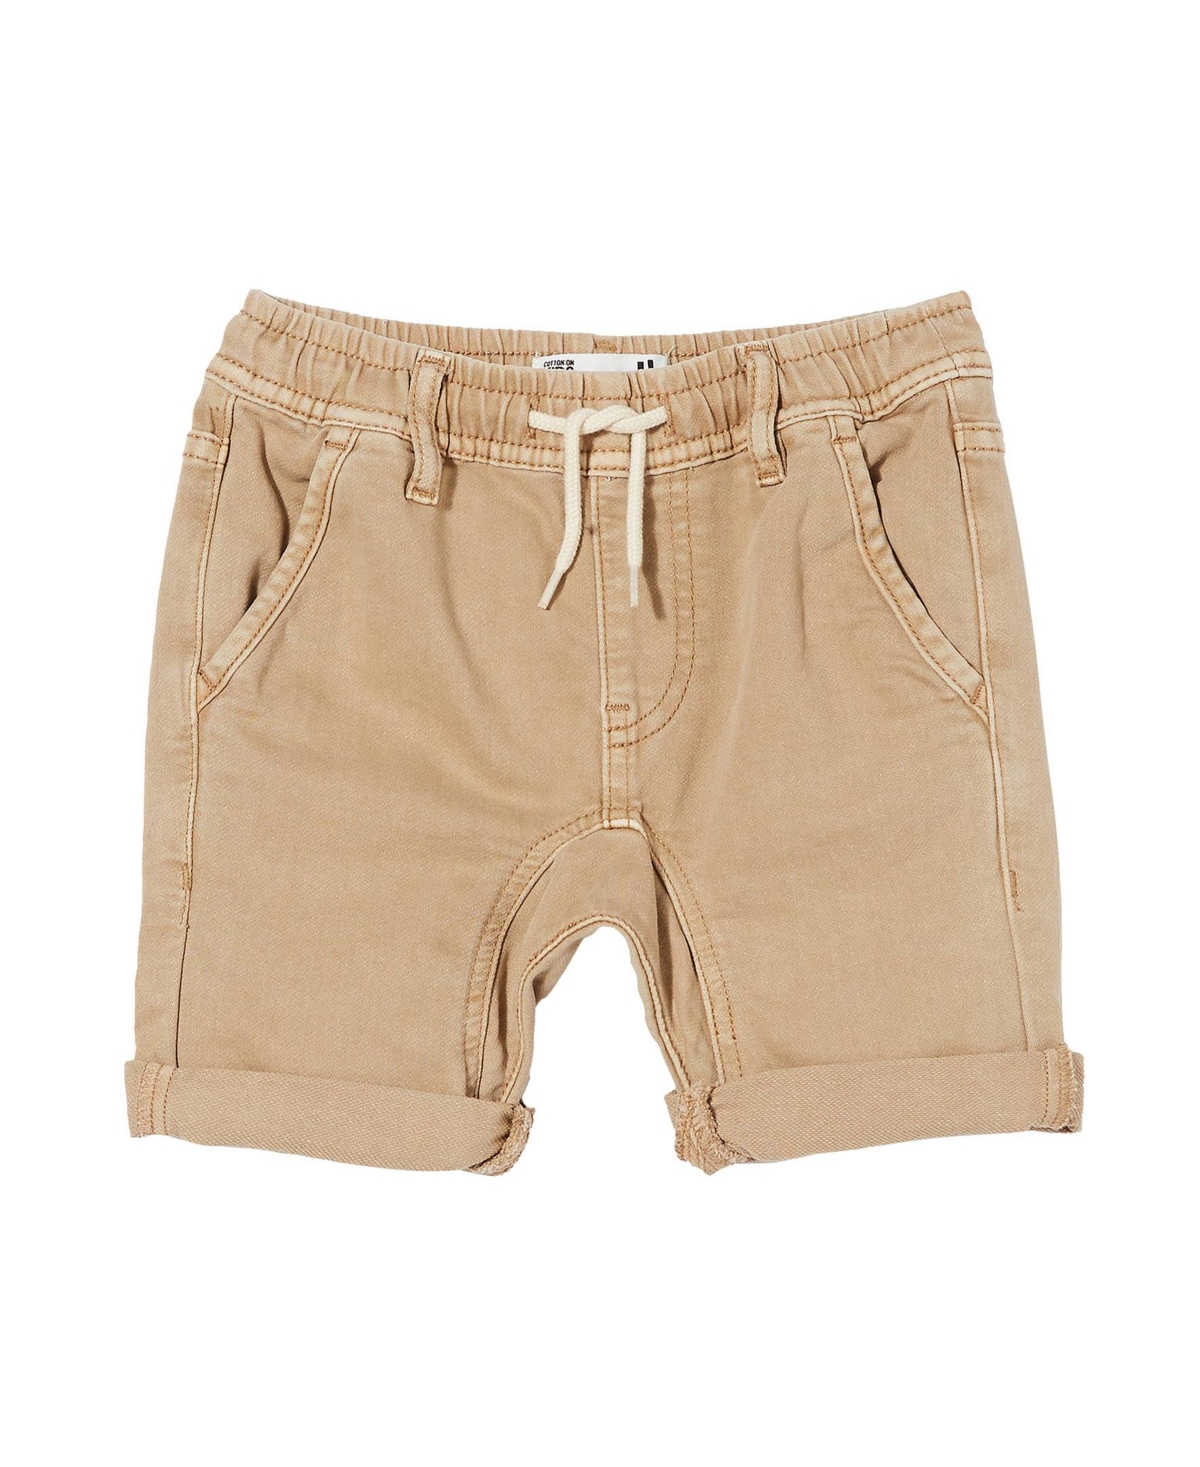 COTTON ON BIG BOYS SLOUCH FIT SHORTS